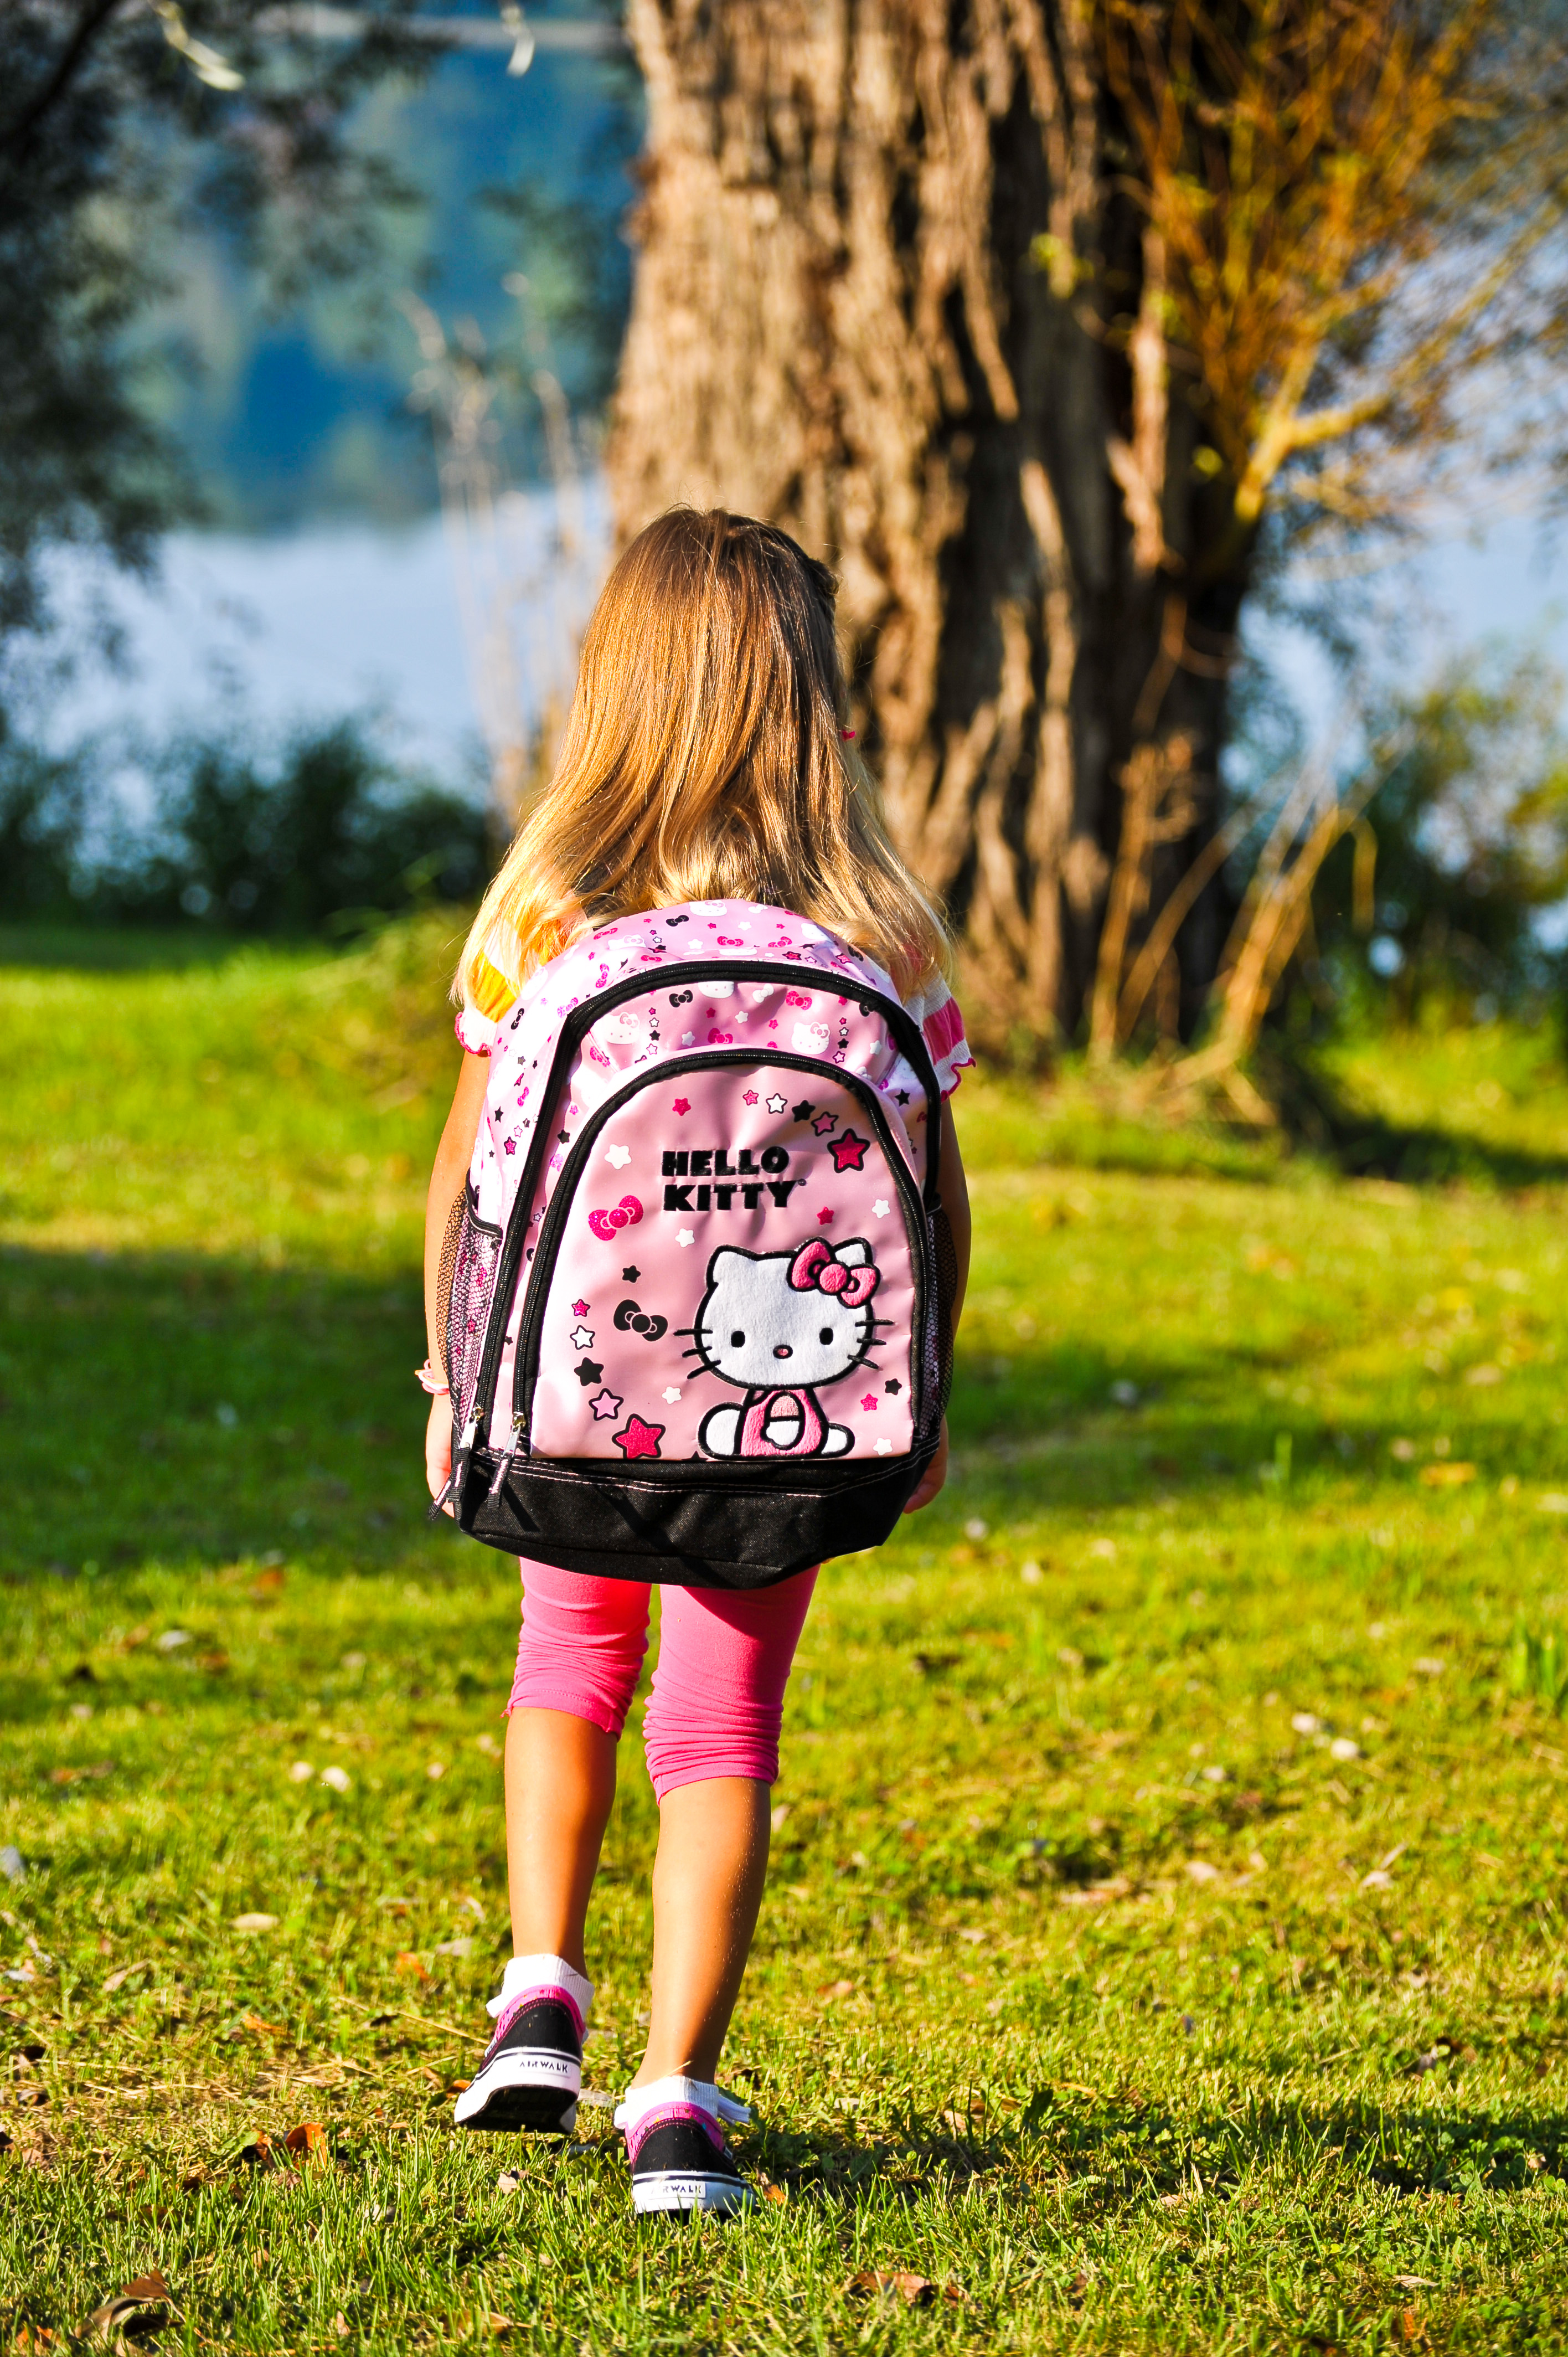 A young girl wears a large pink Hello Kitty backpack, in this photo taken from behind.